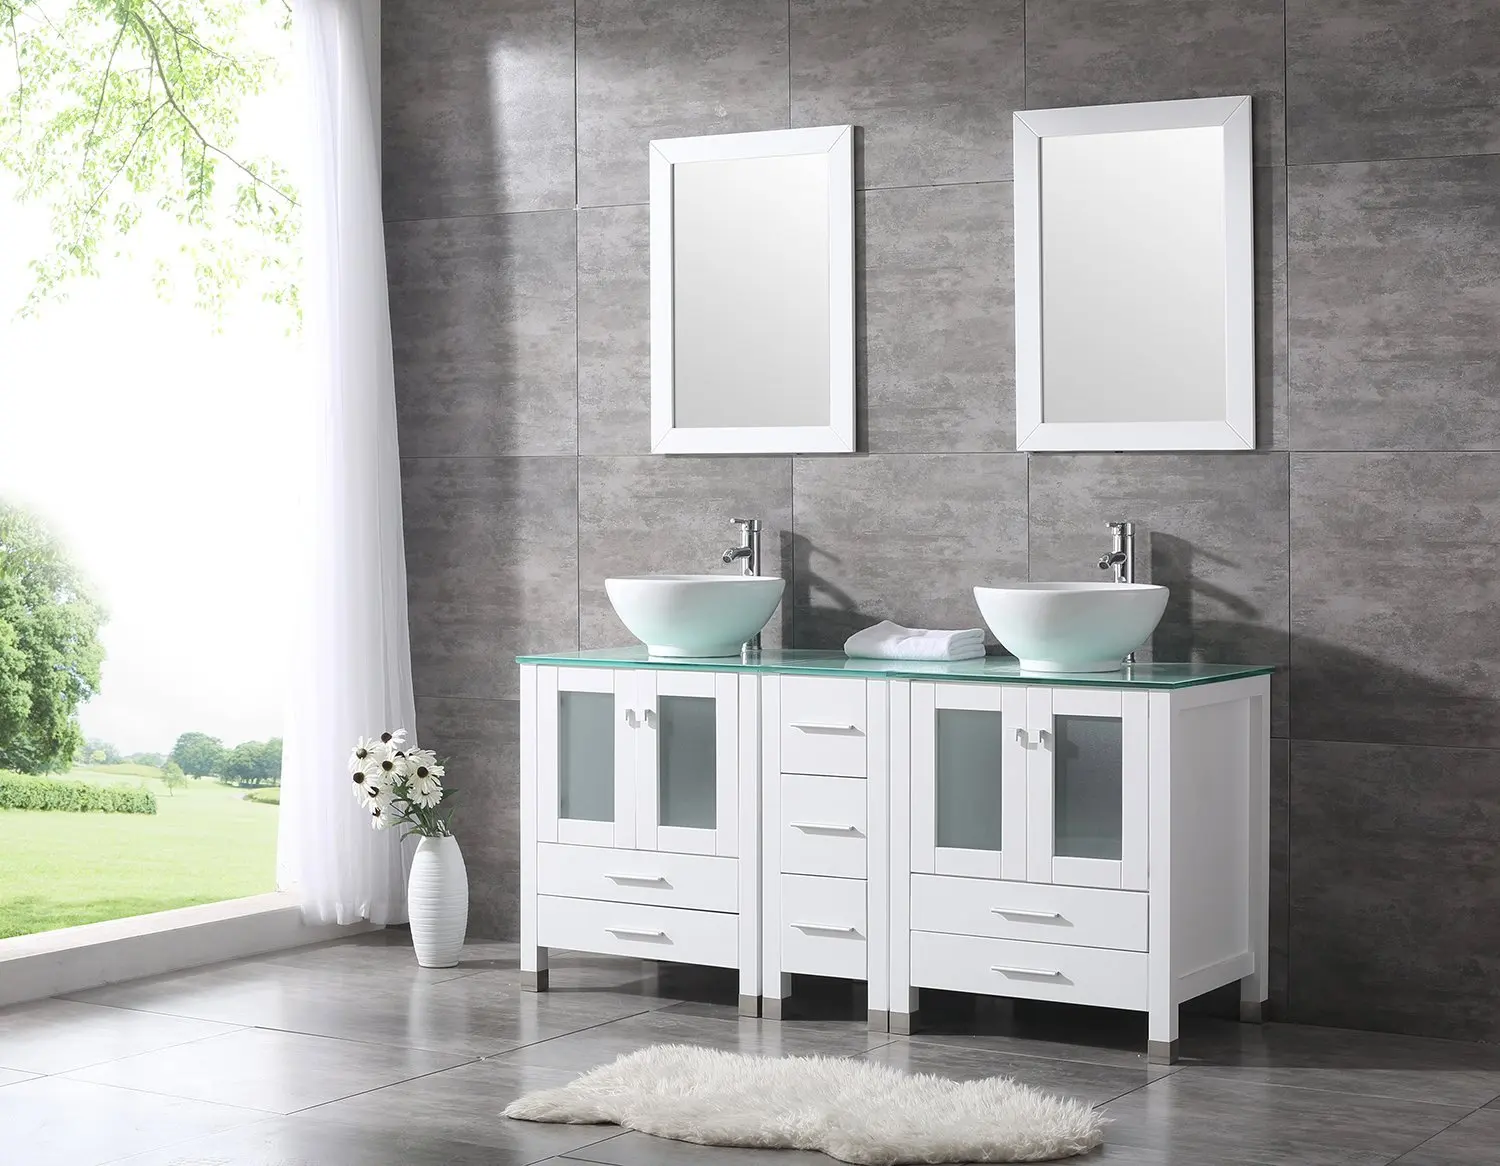 bathroom bowl sink and cabinet